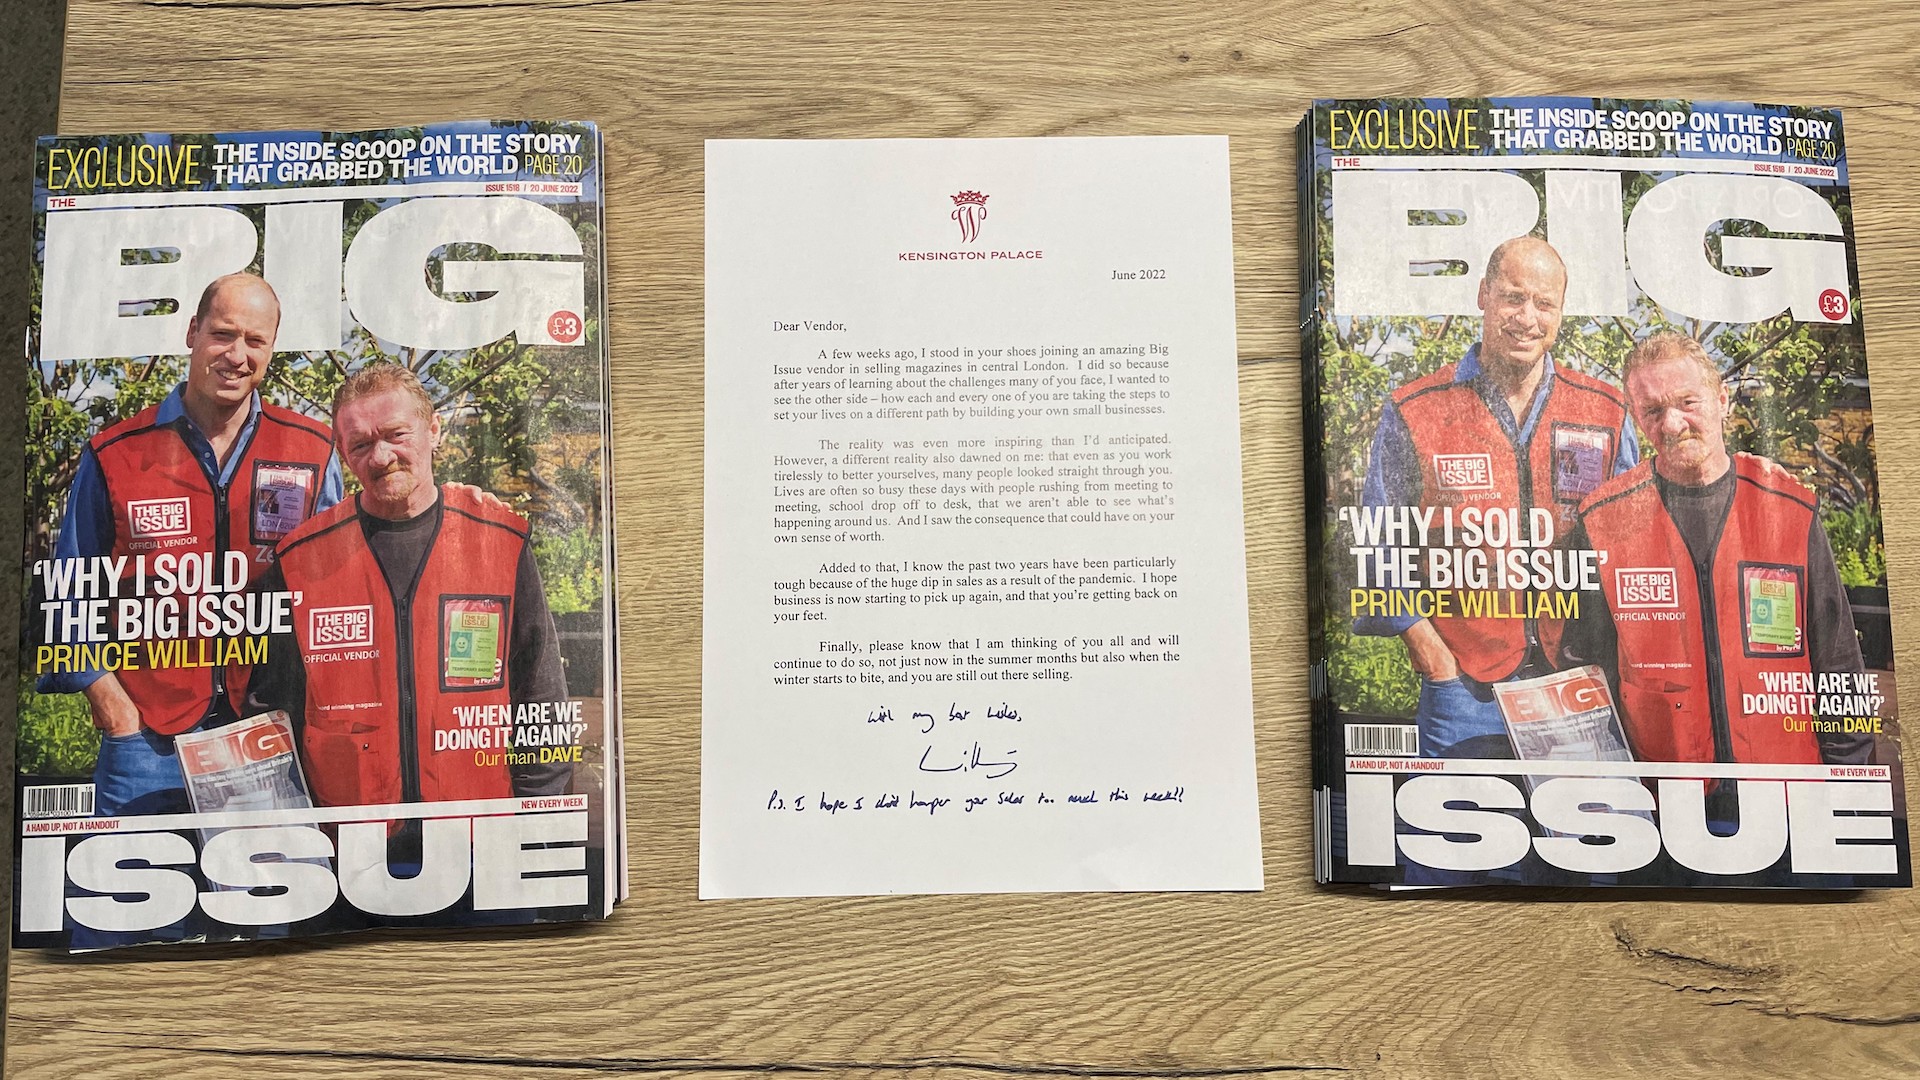 The letter to Big Issue sellers from Prince William sits between copies of the magazine with him on the cover